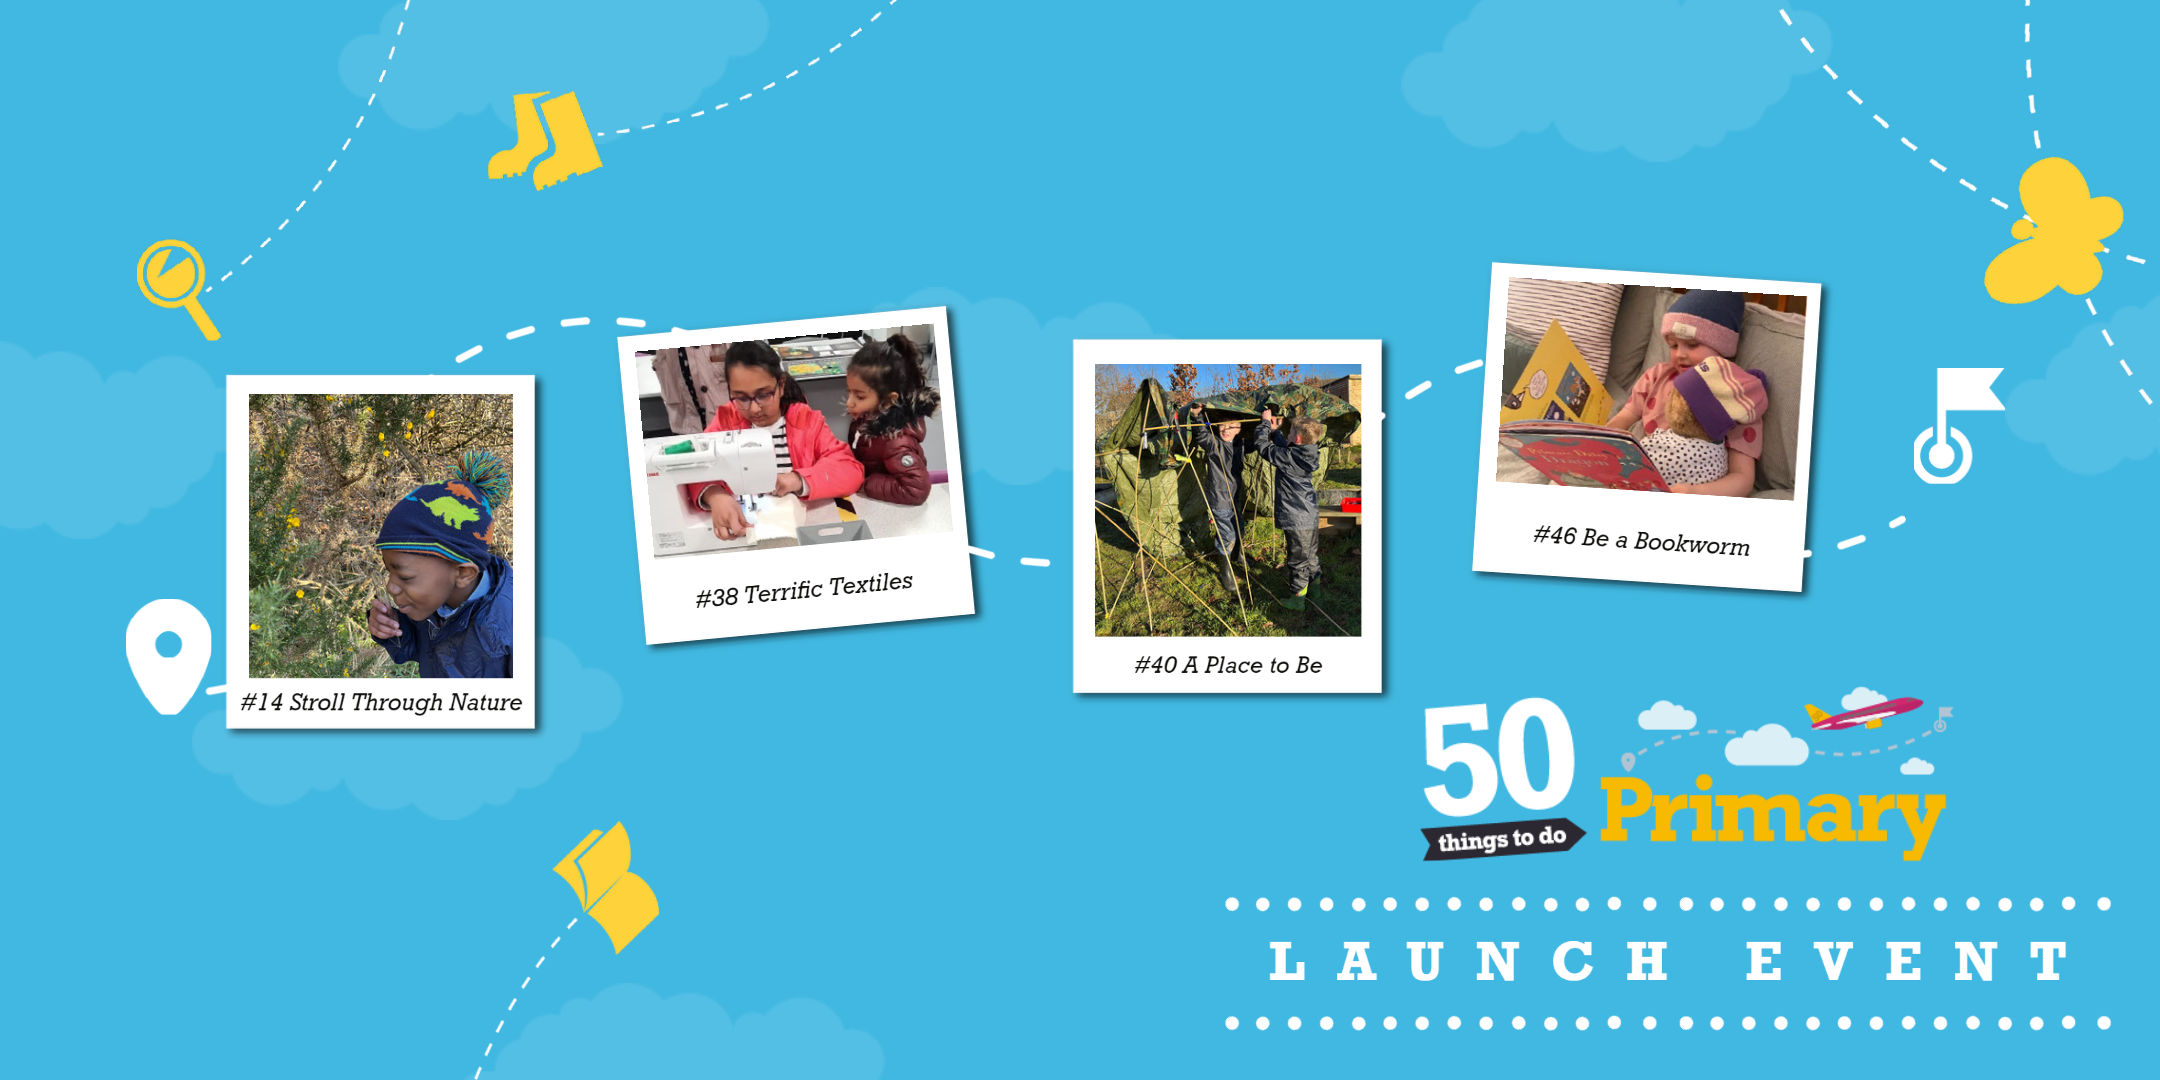 My project launch event banner-1 (2).png